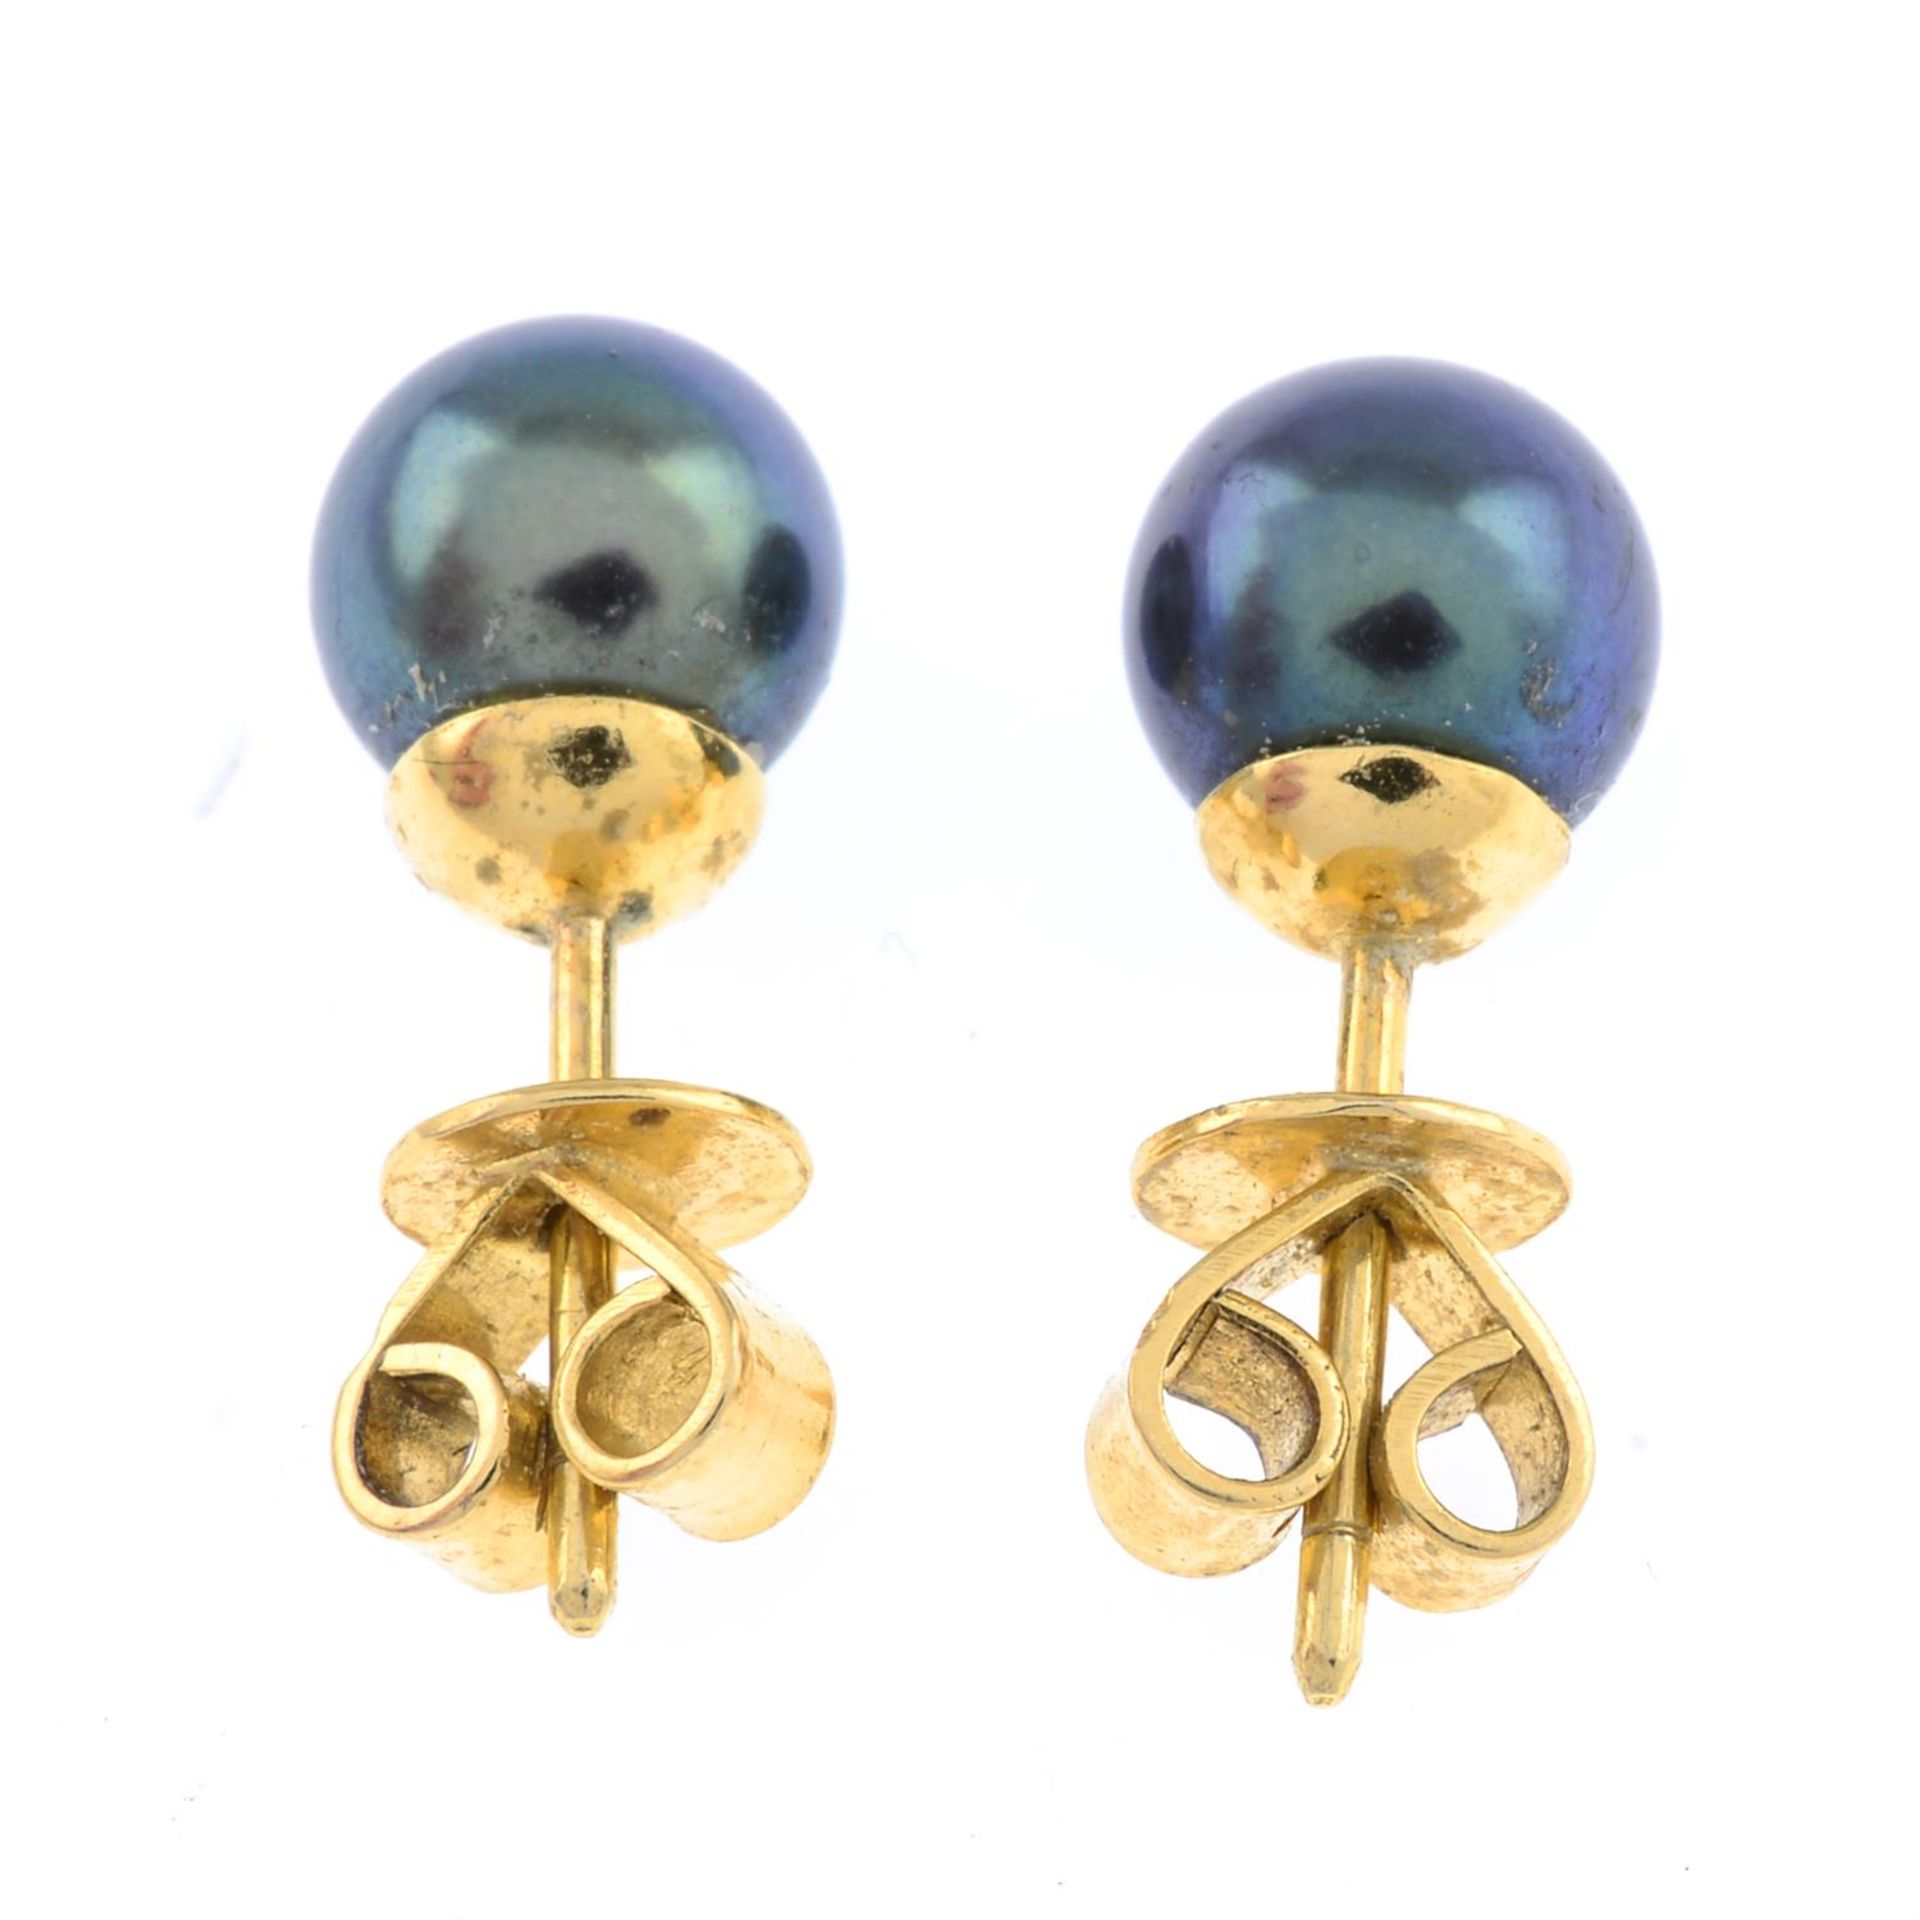 Dyed cultured pearl stud earrings - Image 2 of 2